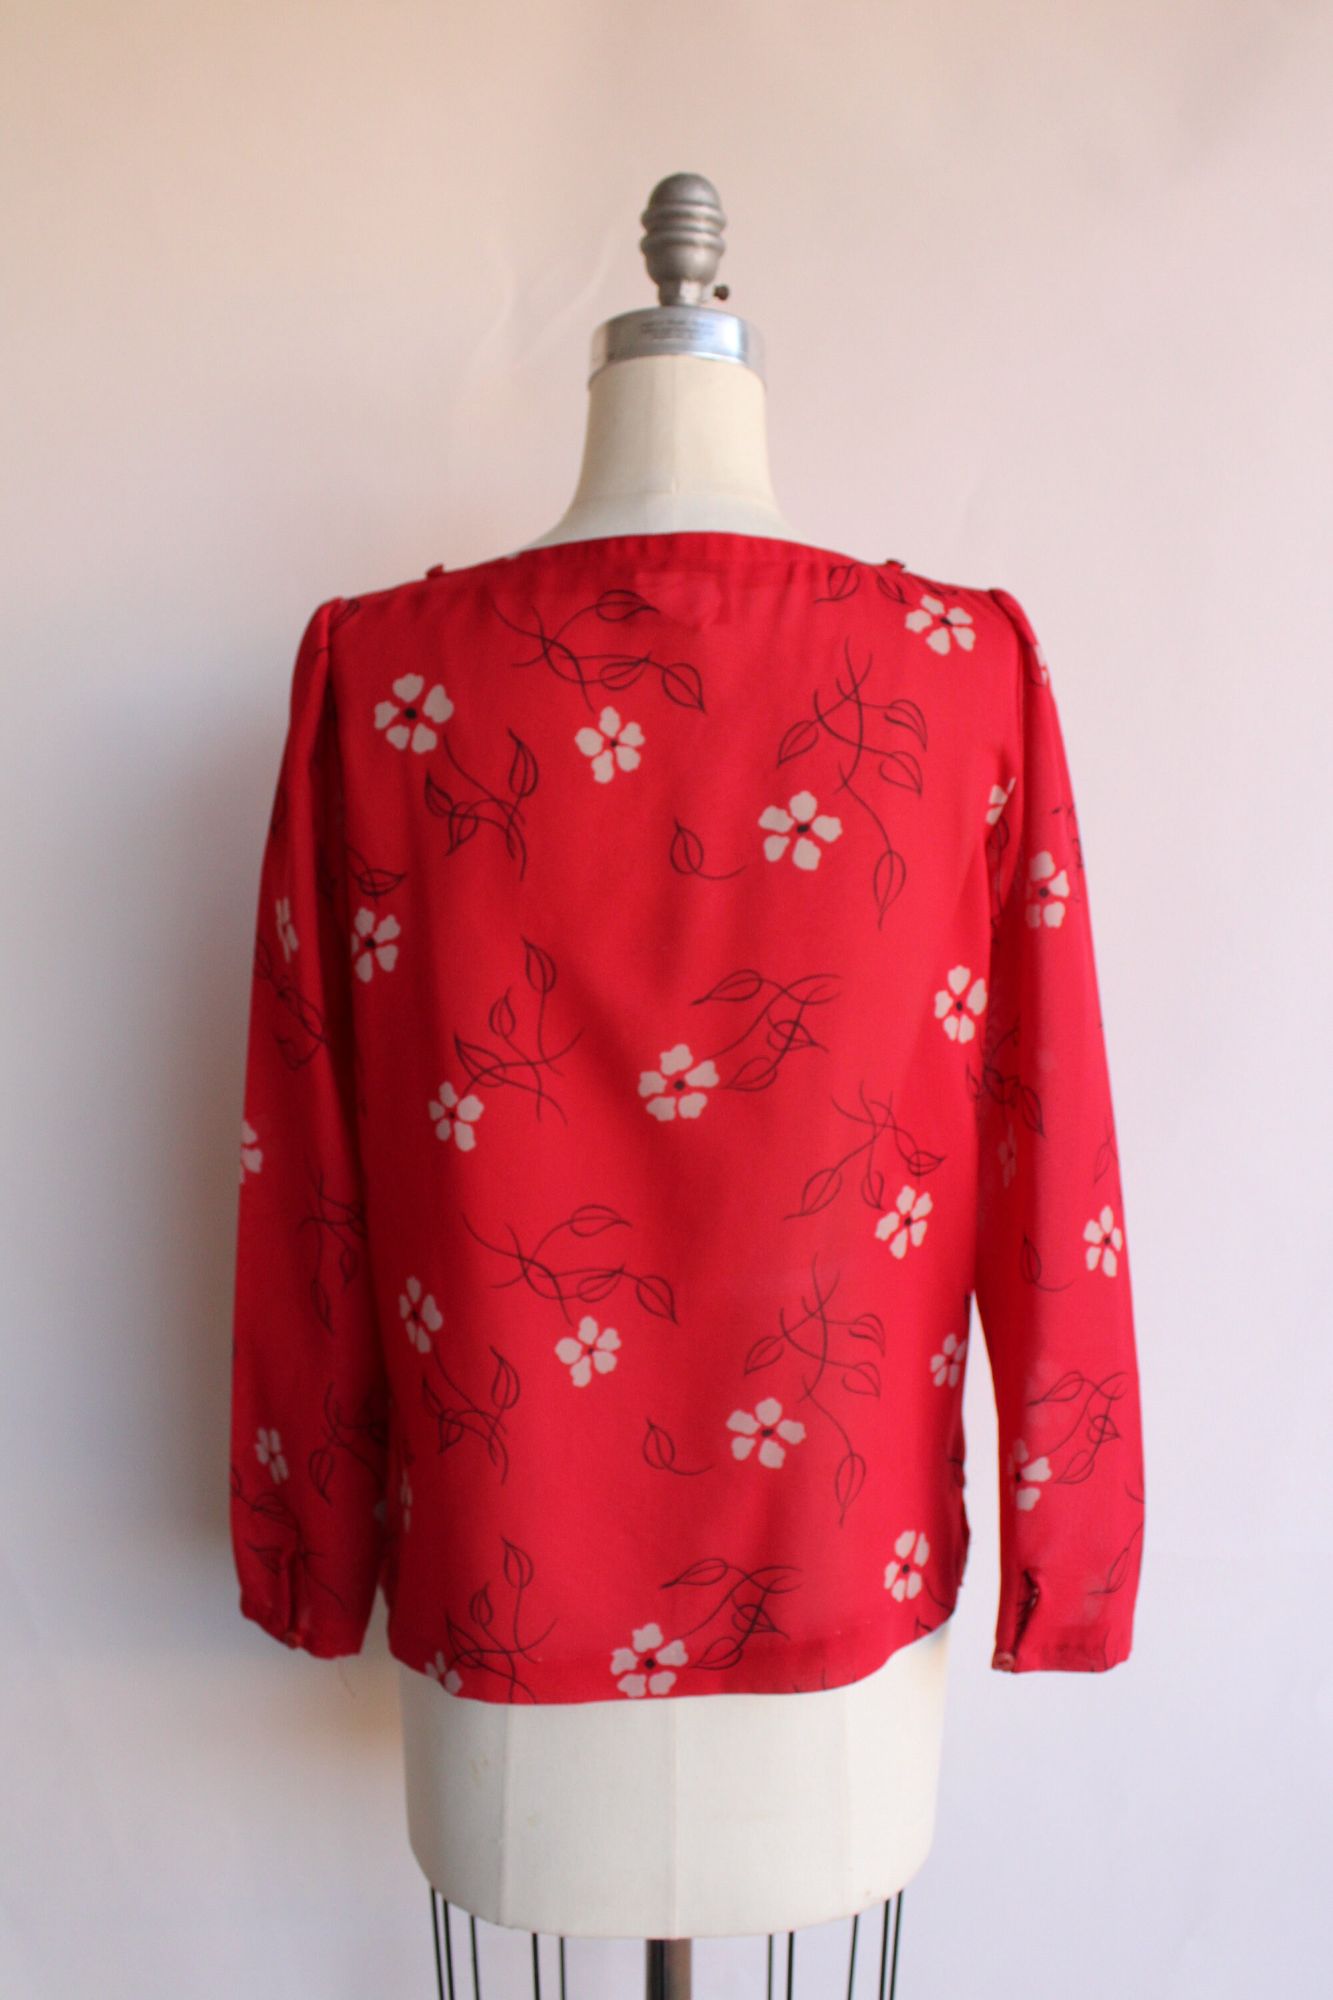 Vintage 1990s 2000s  Red and White Floral Print Blouse